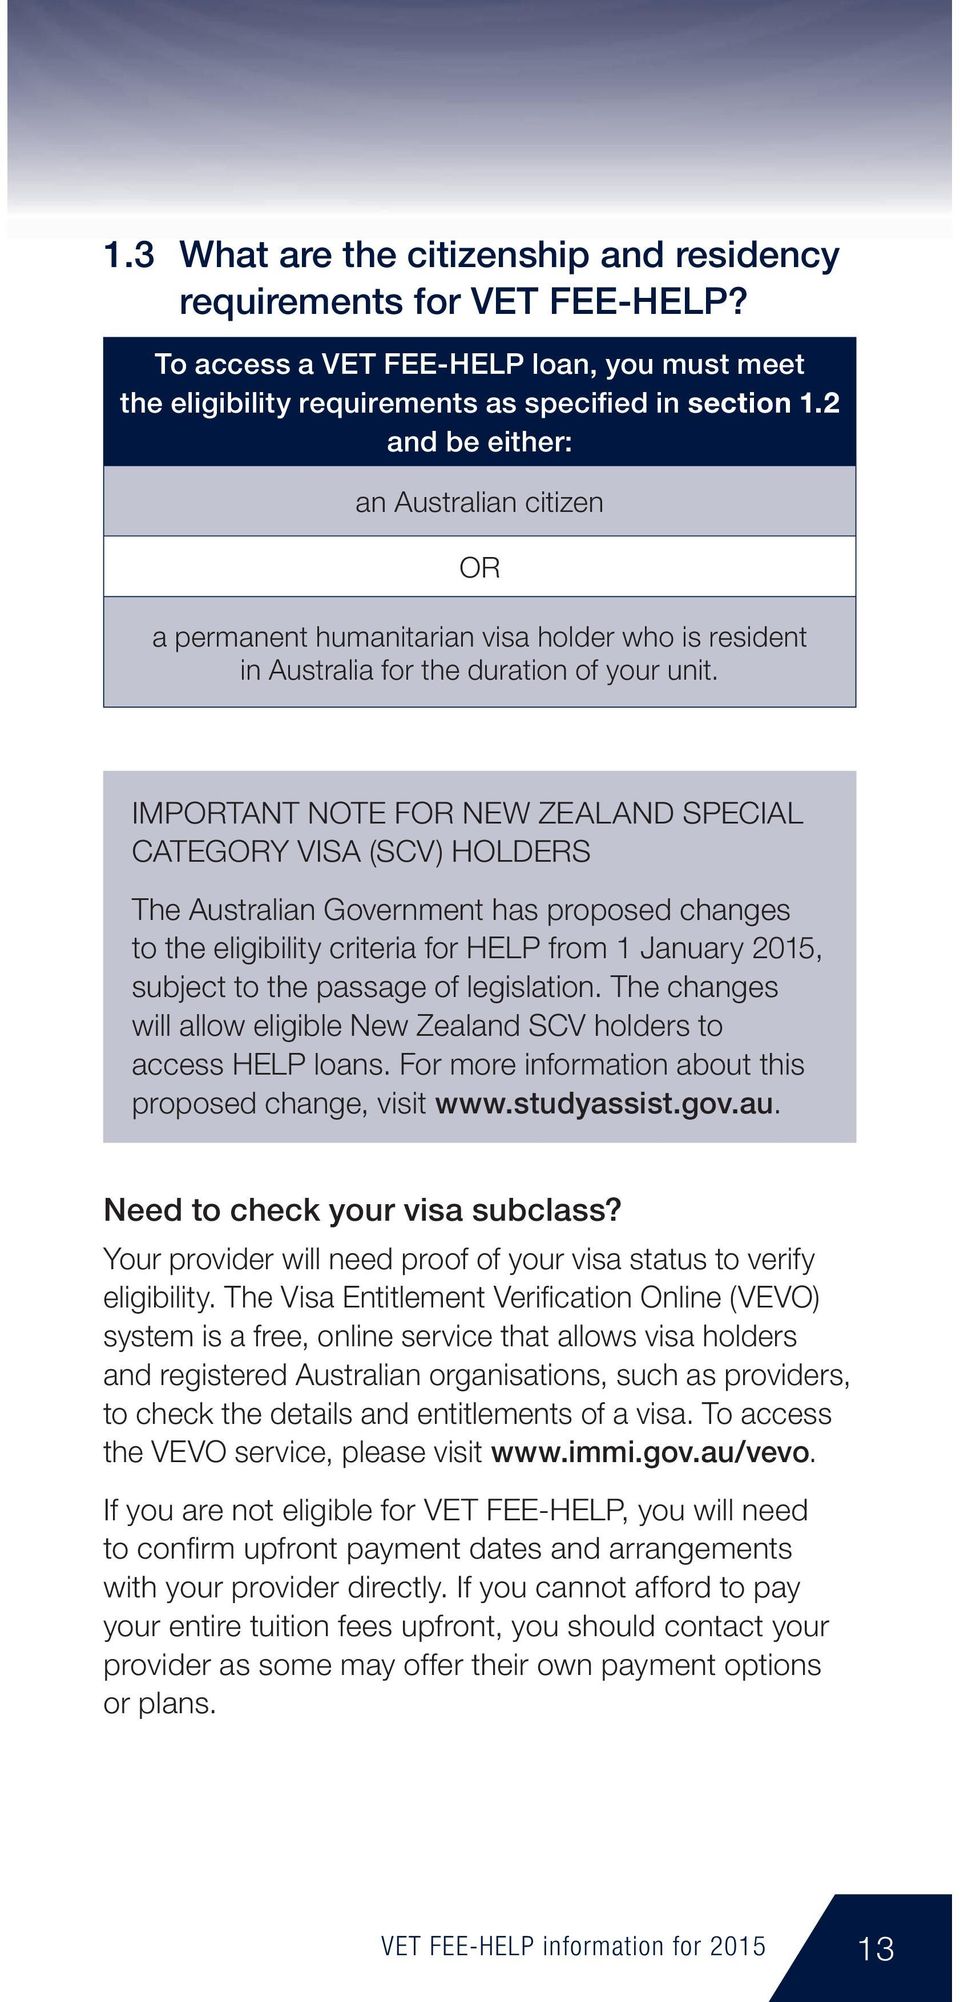 IMPORTANT NOTE FOR NEW ZEALAND SPECIAL CATEGORY VISA (SCV) HOLDERS The Australian Government has proposed changes to the eligibility criteria for HELP from 1 January 2015, subject to the passage of